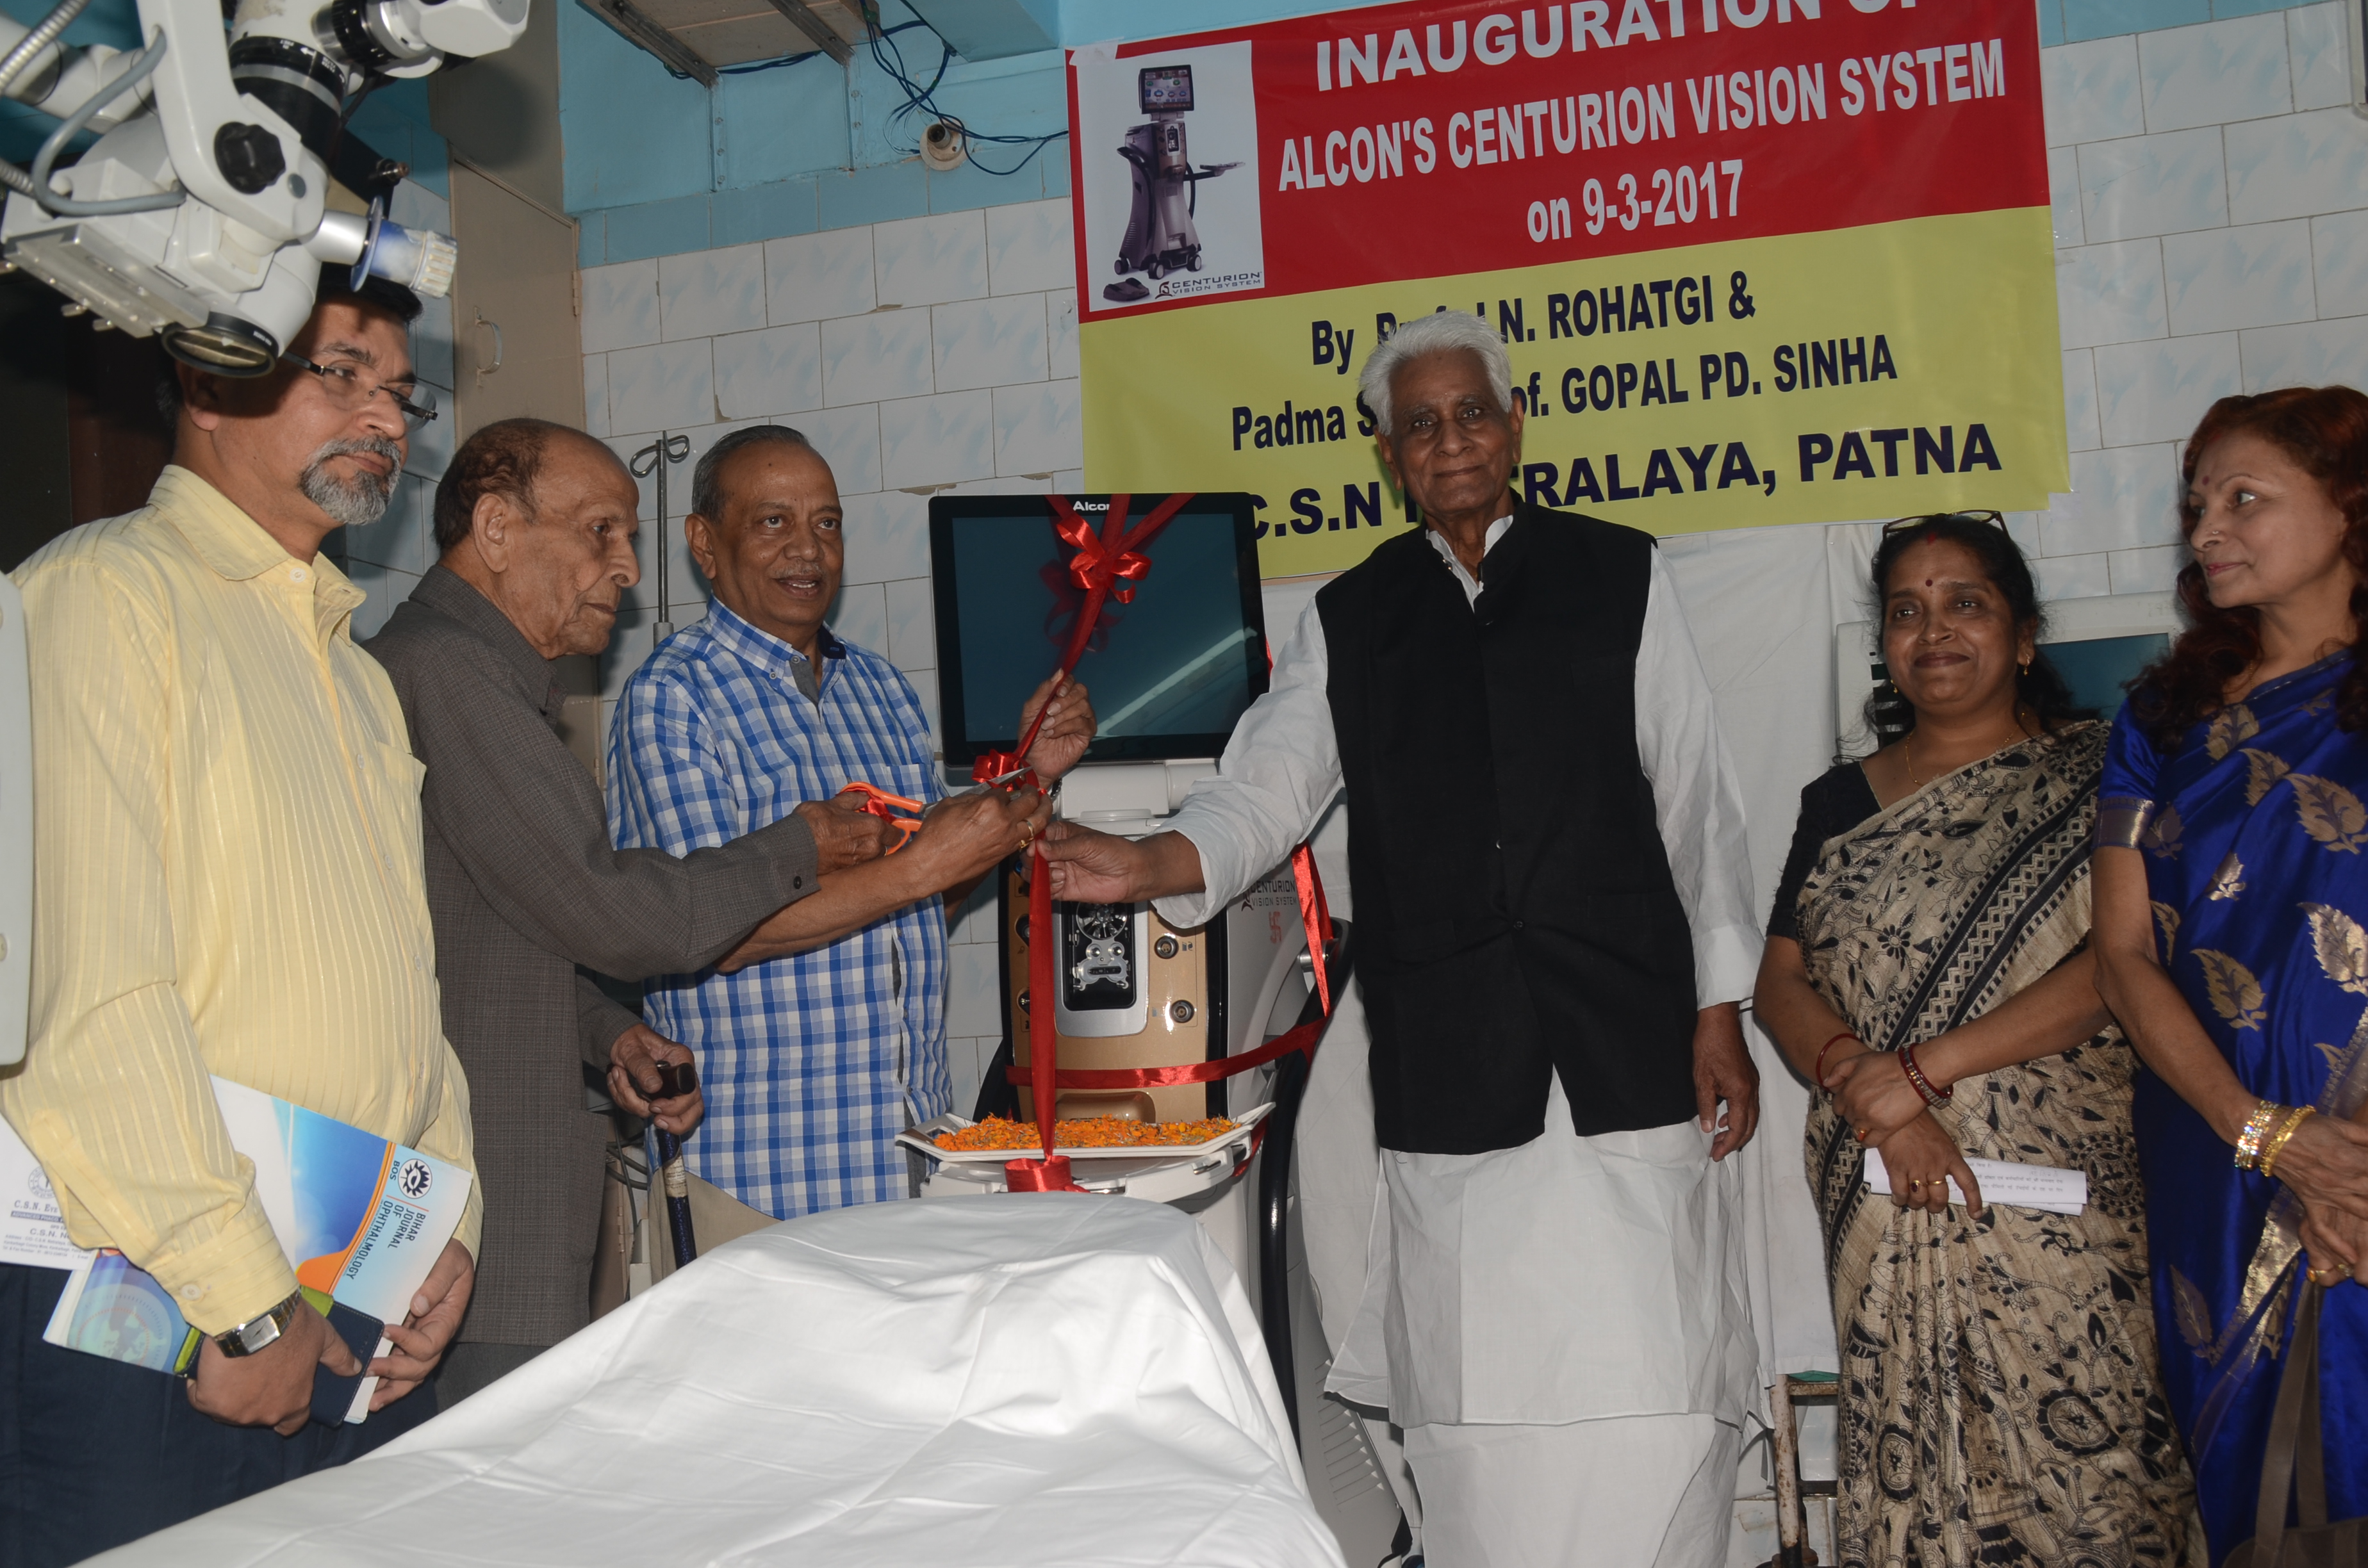 Inauguration of Alcon's Centurion Cold Phaco Unit at Premises of C.S.N Netralaya by Dr. J.N. Rohatgi 